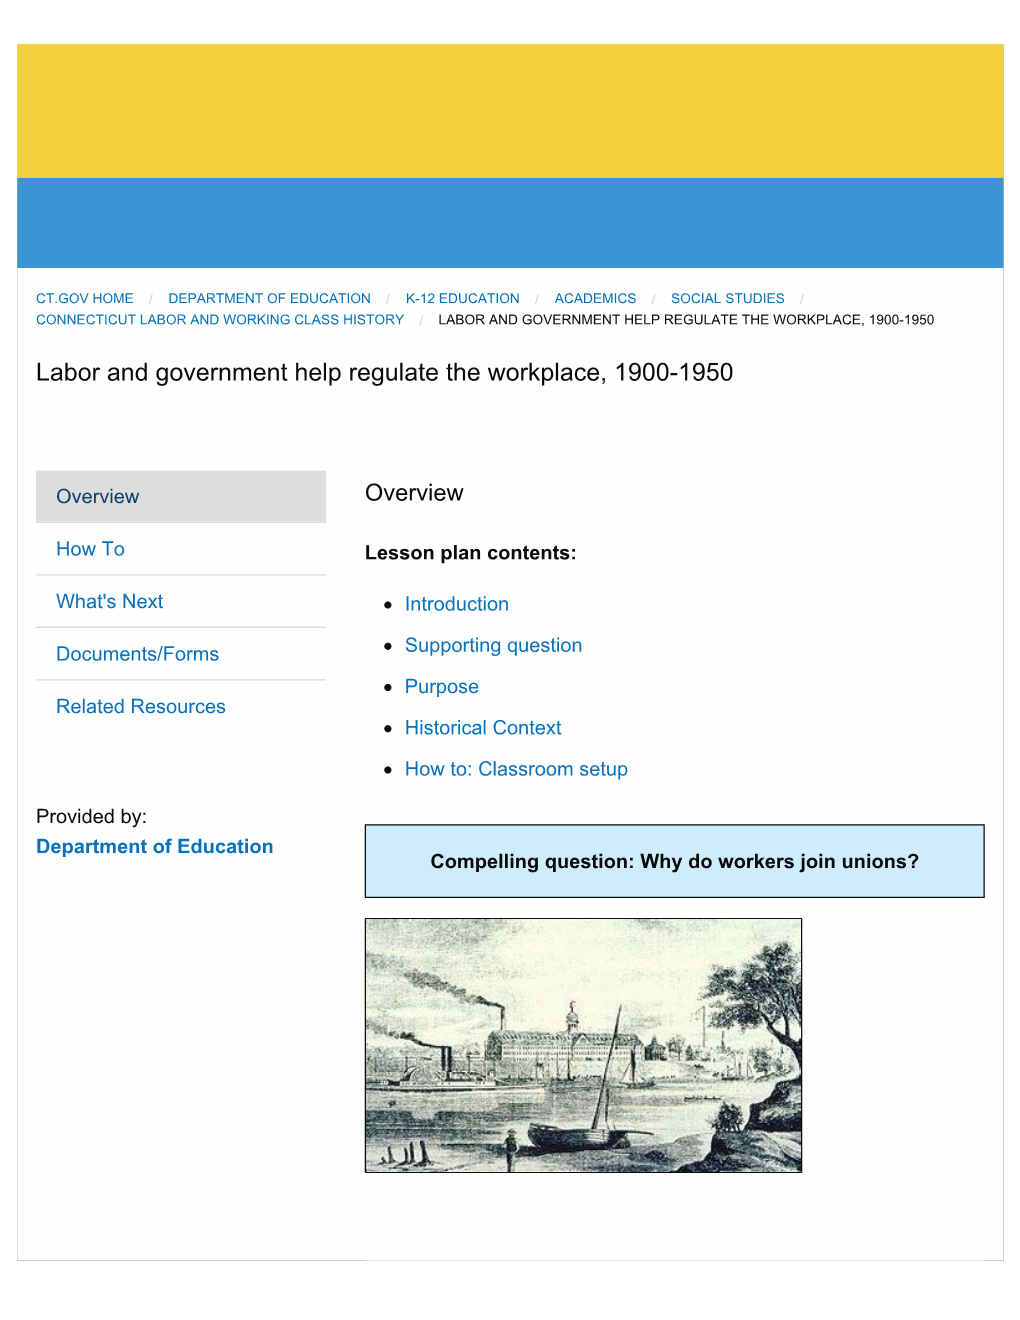 Labor and Government Help Regulate the Workplace 1900-1950